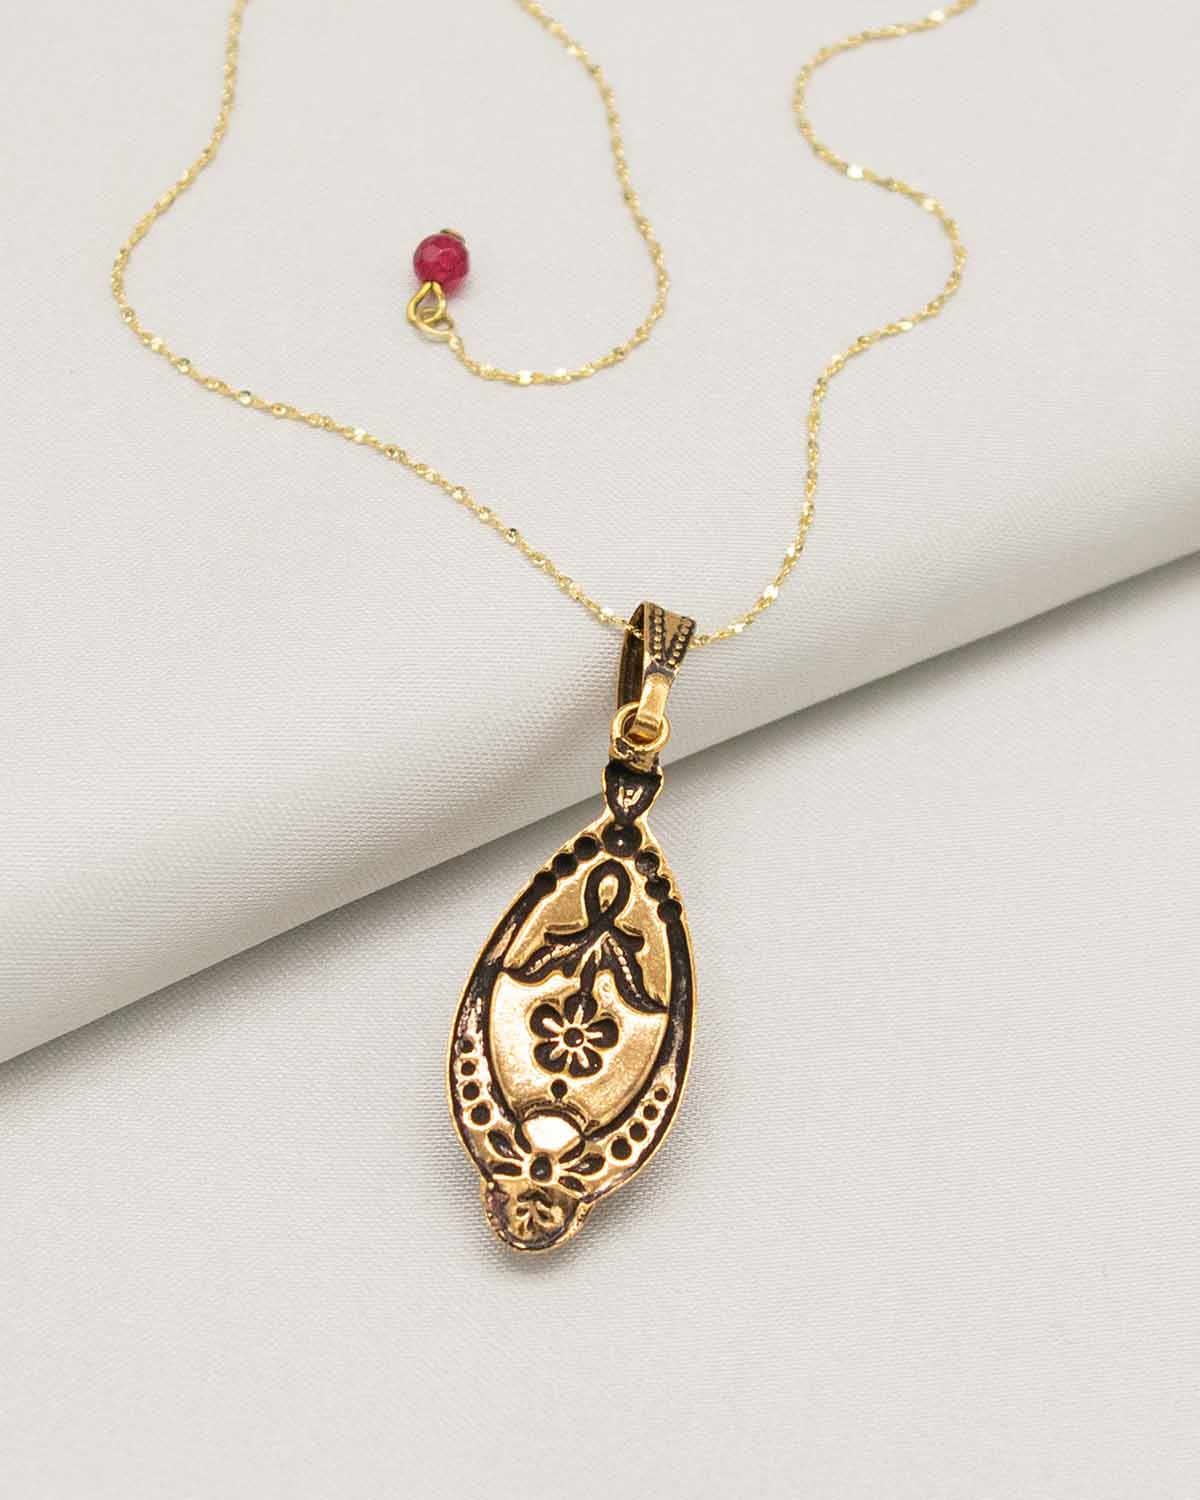 – | Necklace Magenta in (Handmade Ortica Royal Style Pendant Jewelry Italy) Vintage